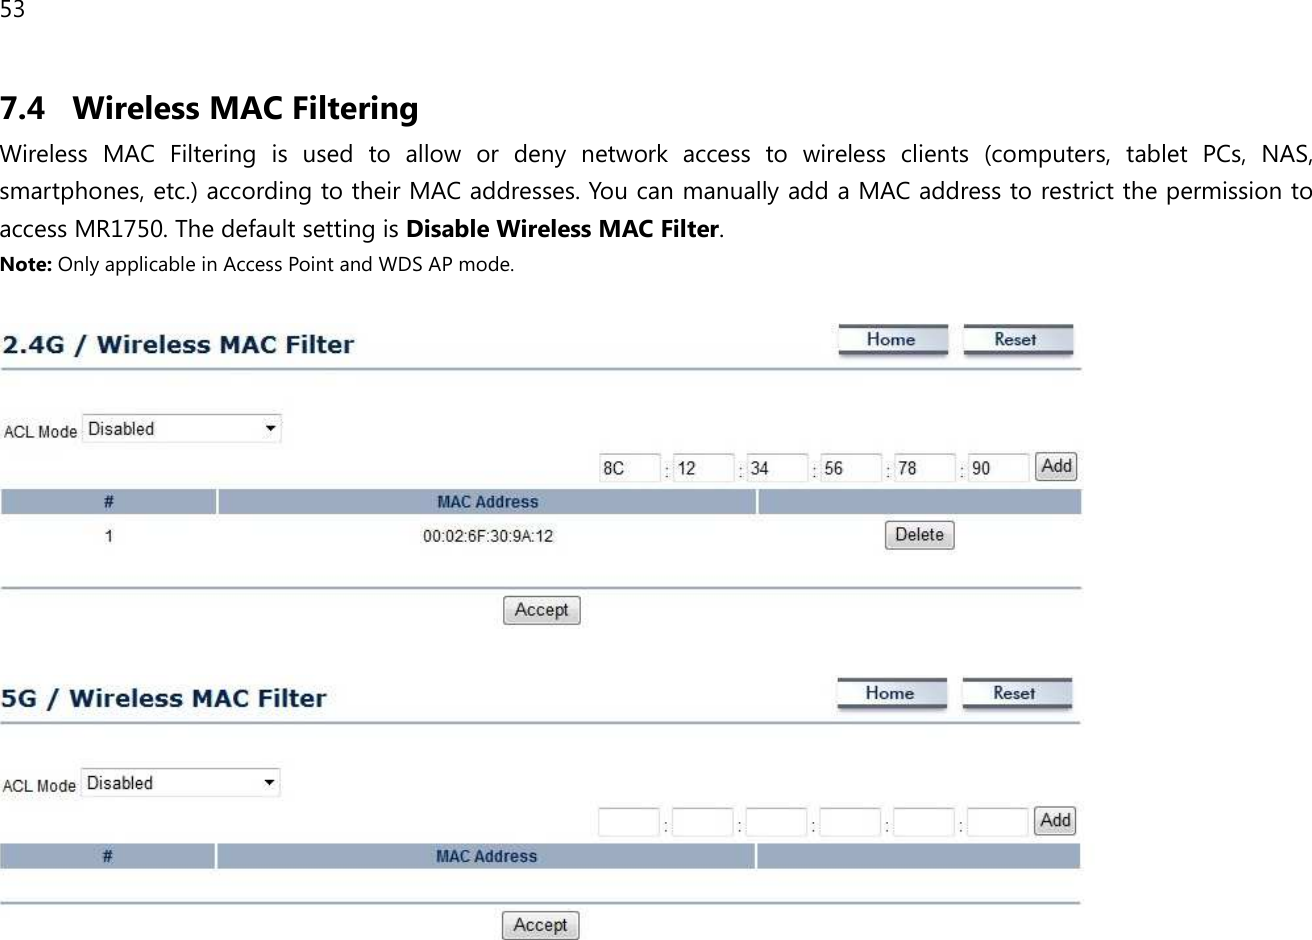 53  7.4 Wireless MAC Filtering Wireless  MAC  Filtering  is  used  to  allow  or  deny  network  access  to  wireless  clients  (computers,  tablet  PCs,  NAS, smartphones, etc.) according to their MAC addresses. You can manually add a MAC address to restrict the permission to access MR1750. The default setting is Disable Wireless MAC Filter. Note: Only applicable in Access Point and WDS AP mode.      